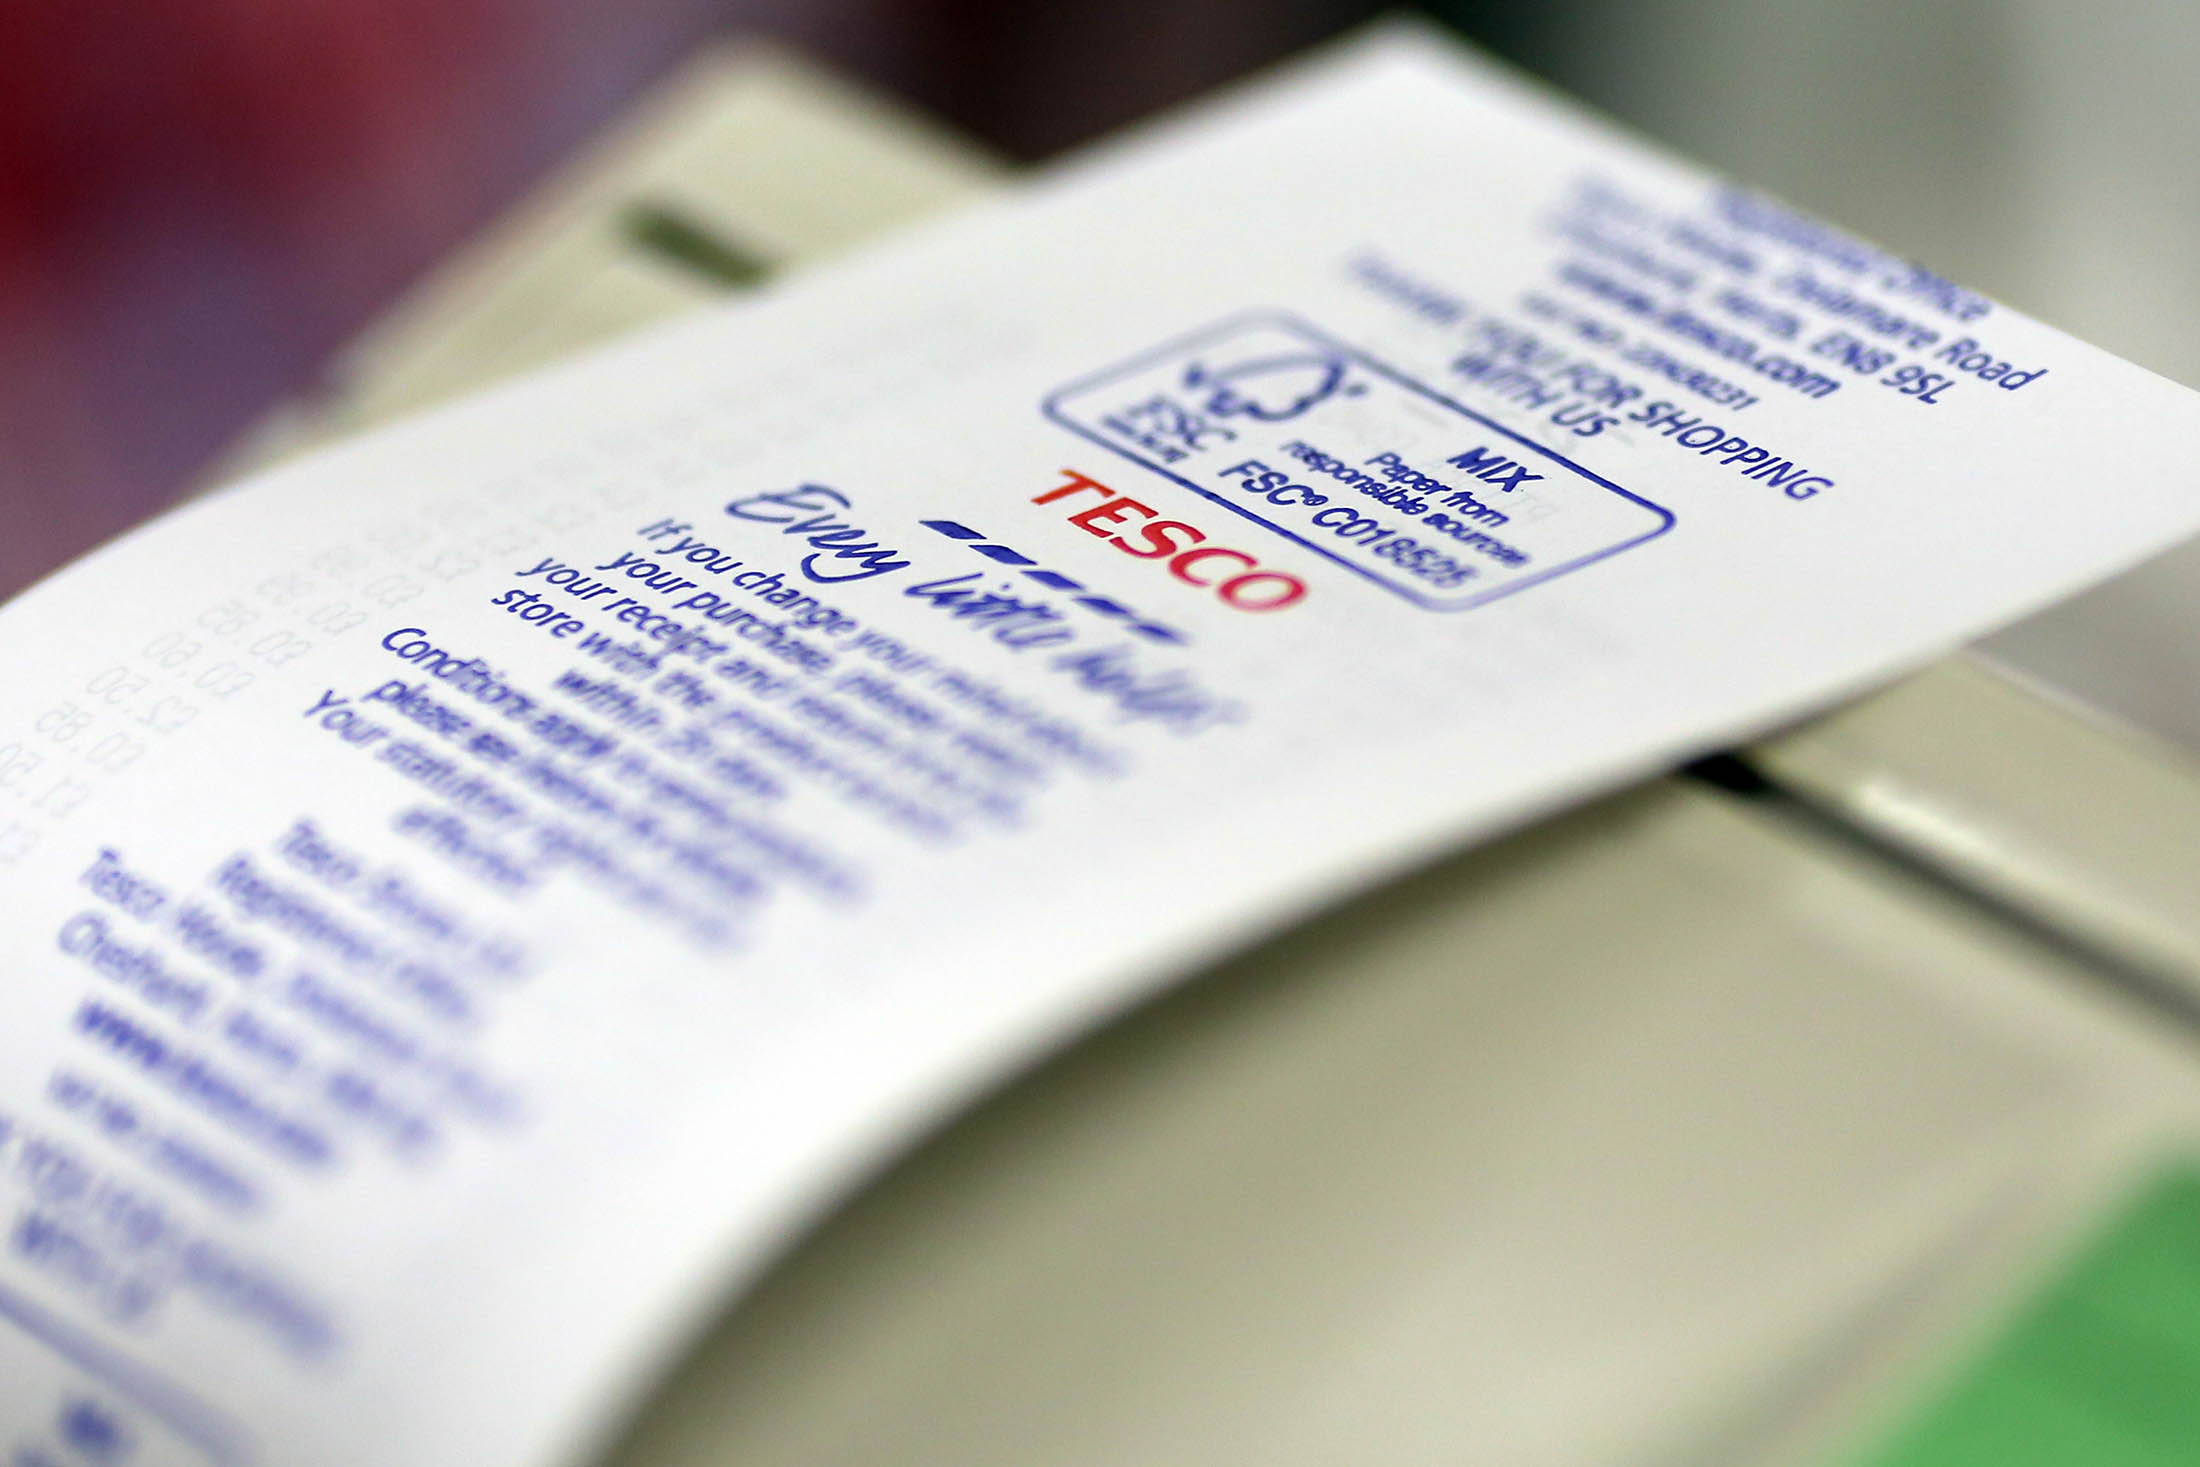 A Tesco logo sits on the back of a receipt at the Tesco Basildon Pitsea Extra supermarket, operated by Tesco Plc, in Basildon, U.K., on Tuesday, Dec. 1, 2015. Many European food retailers are coming to terms with persistently low inflation as well as consumers who remain frugal yet purchase food more frequently.
